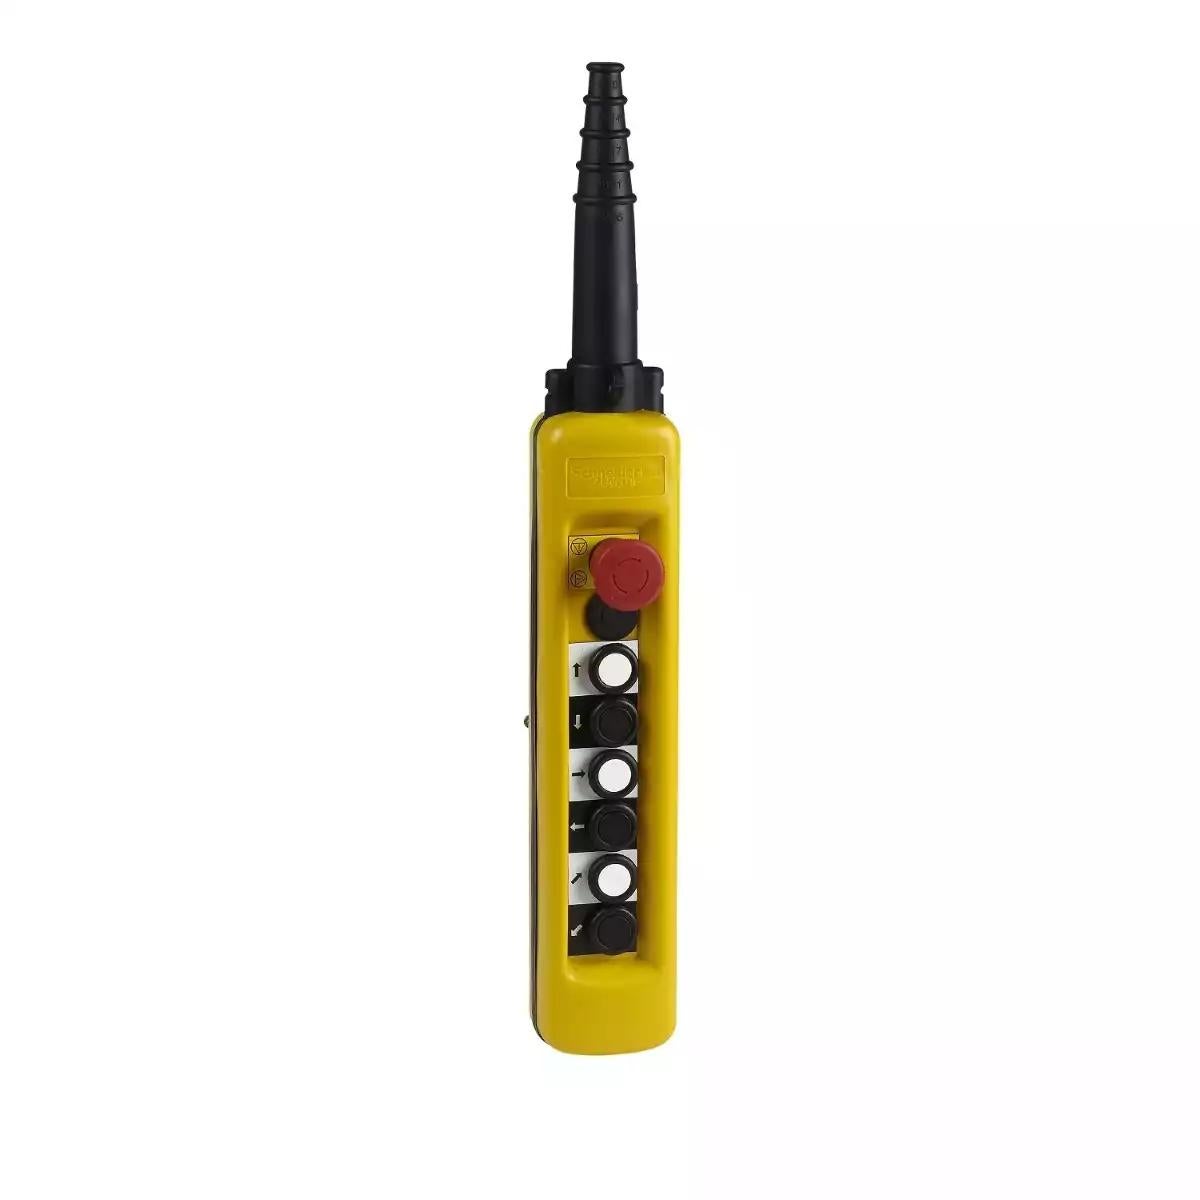 Pendant control station, plastic, yellow, 6 push buttons, 1 emergency stop